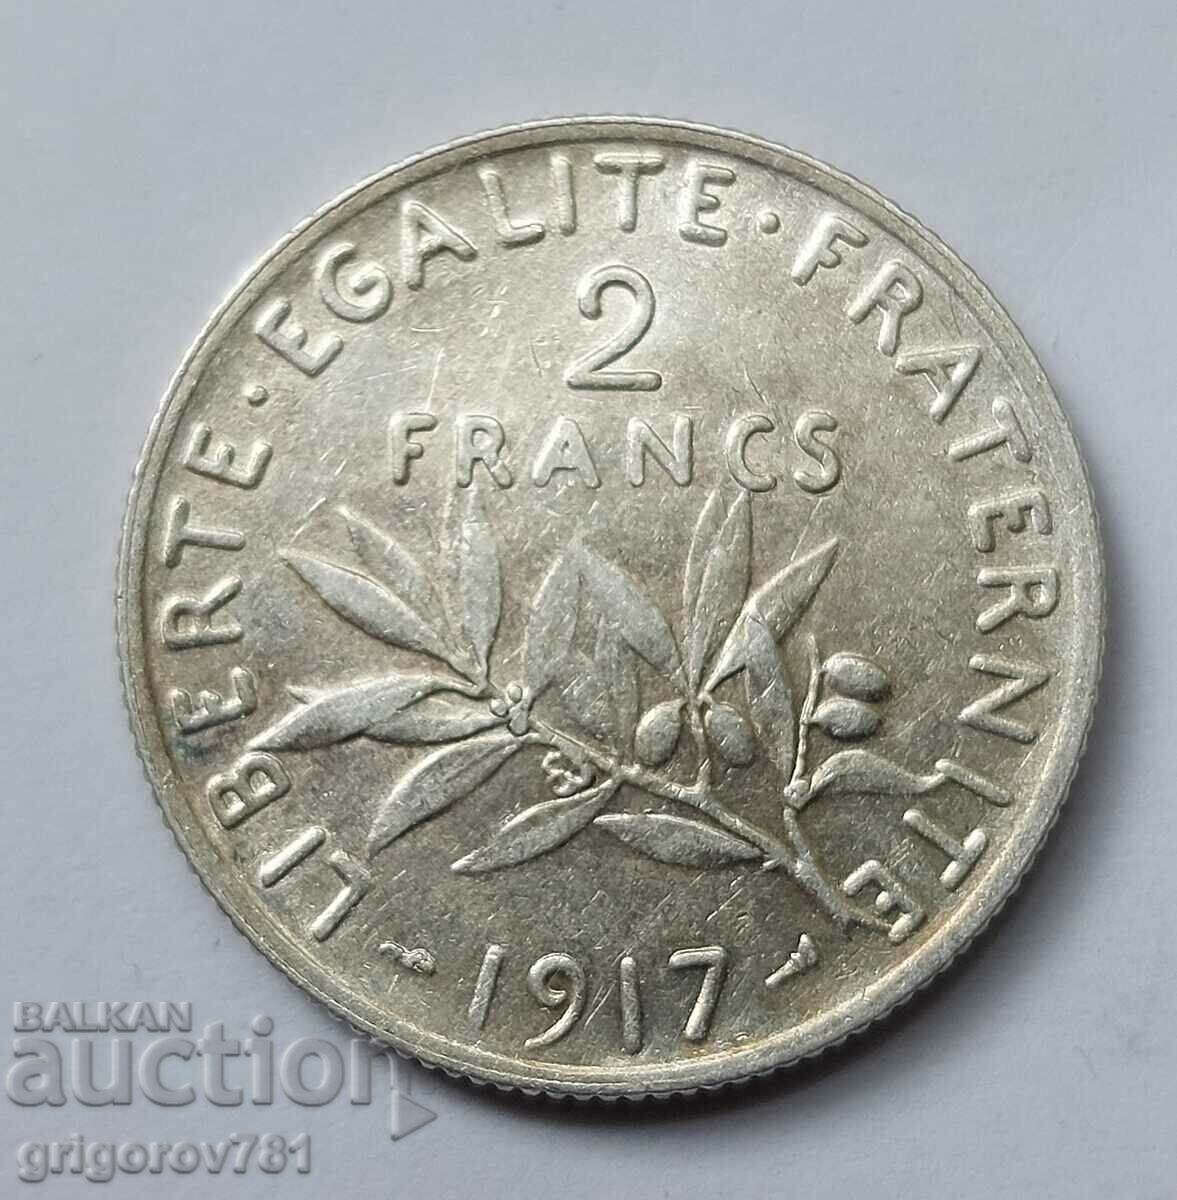 2 Francs Silver France 1917 - Silver Coin #105